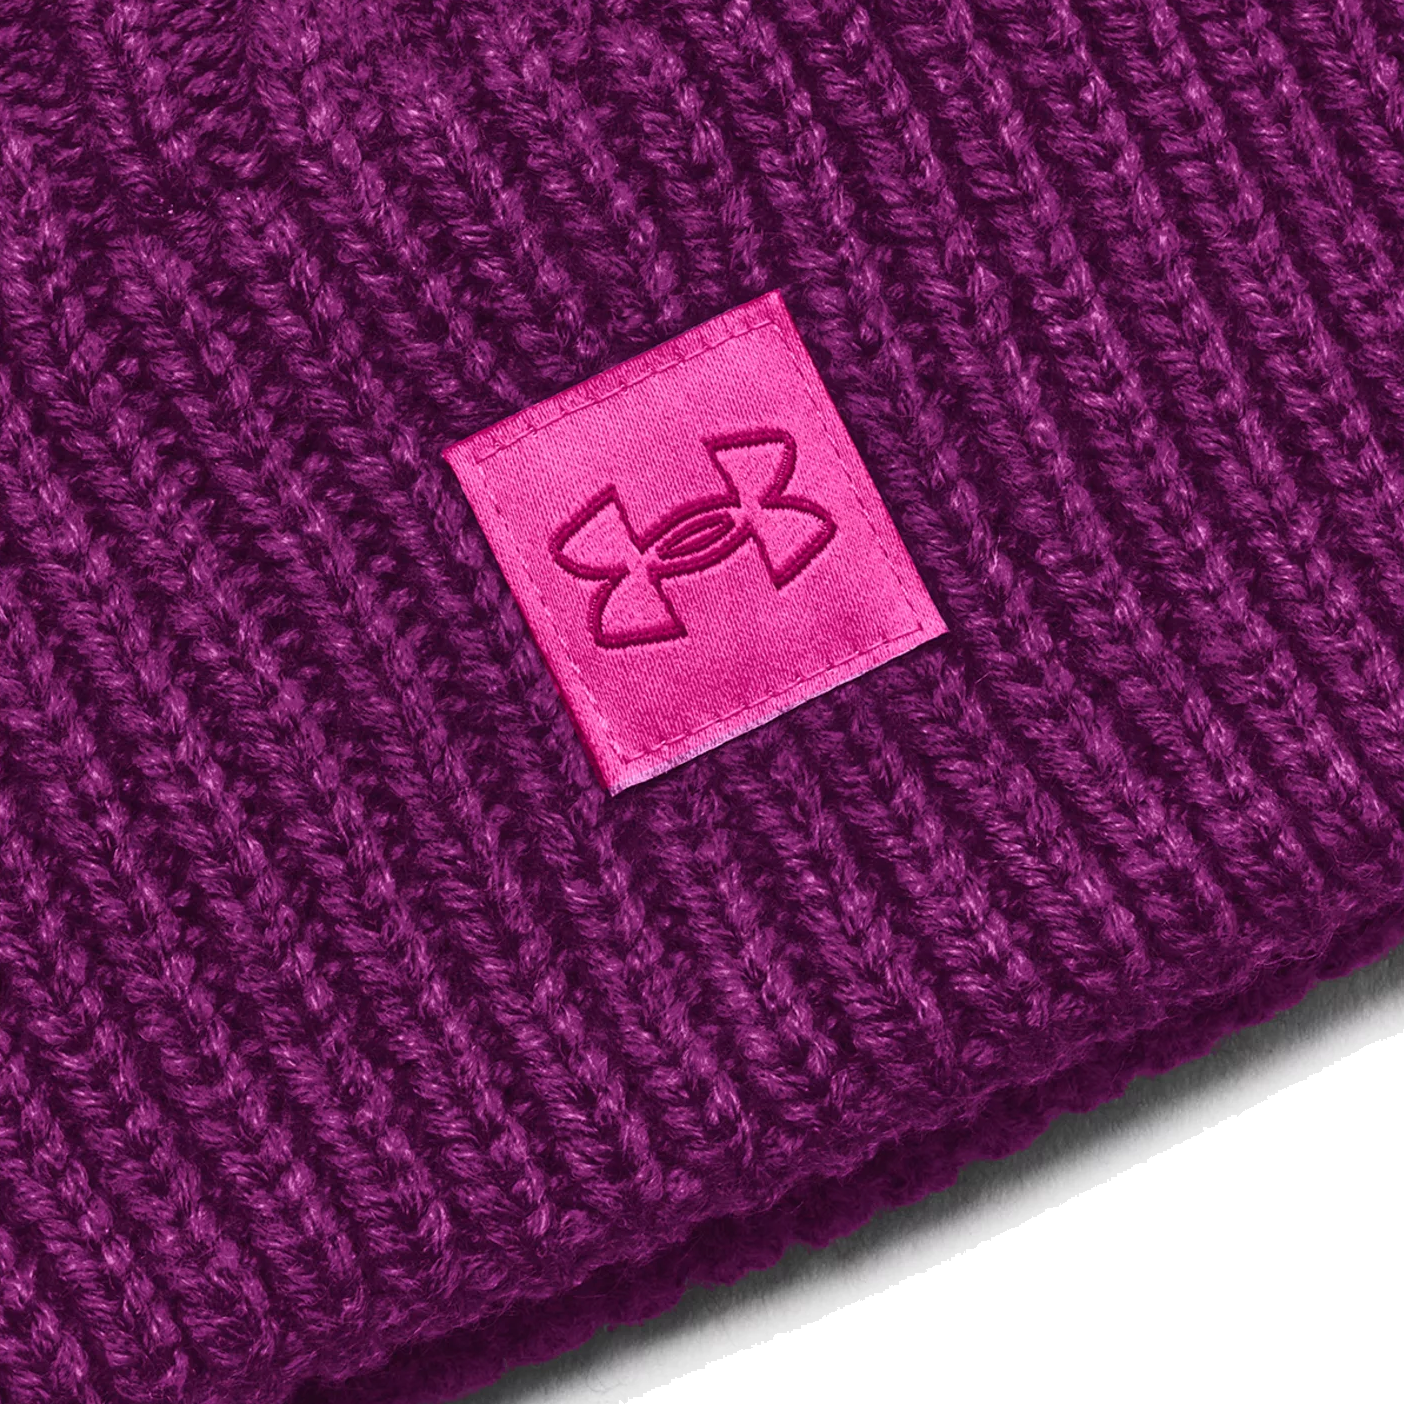 Halftime Cable Knit Beanie